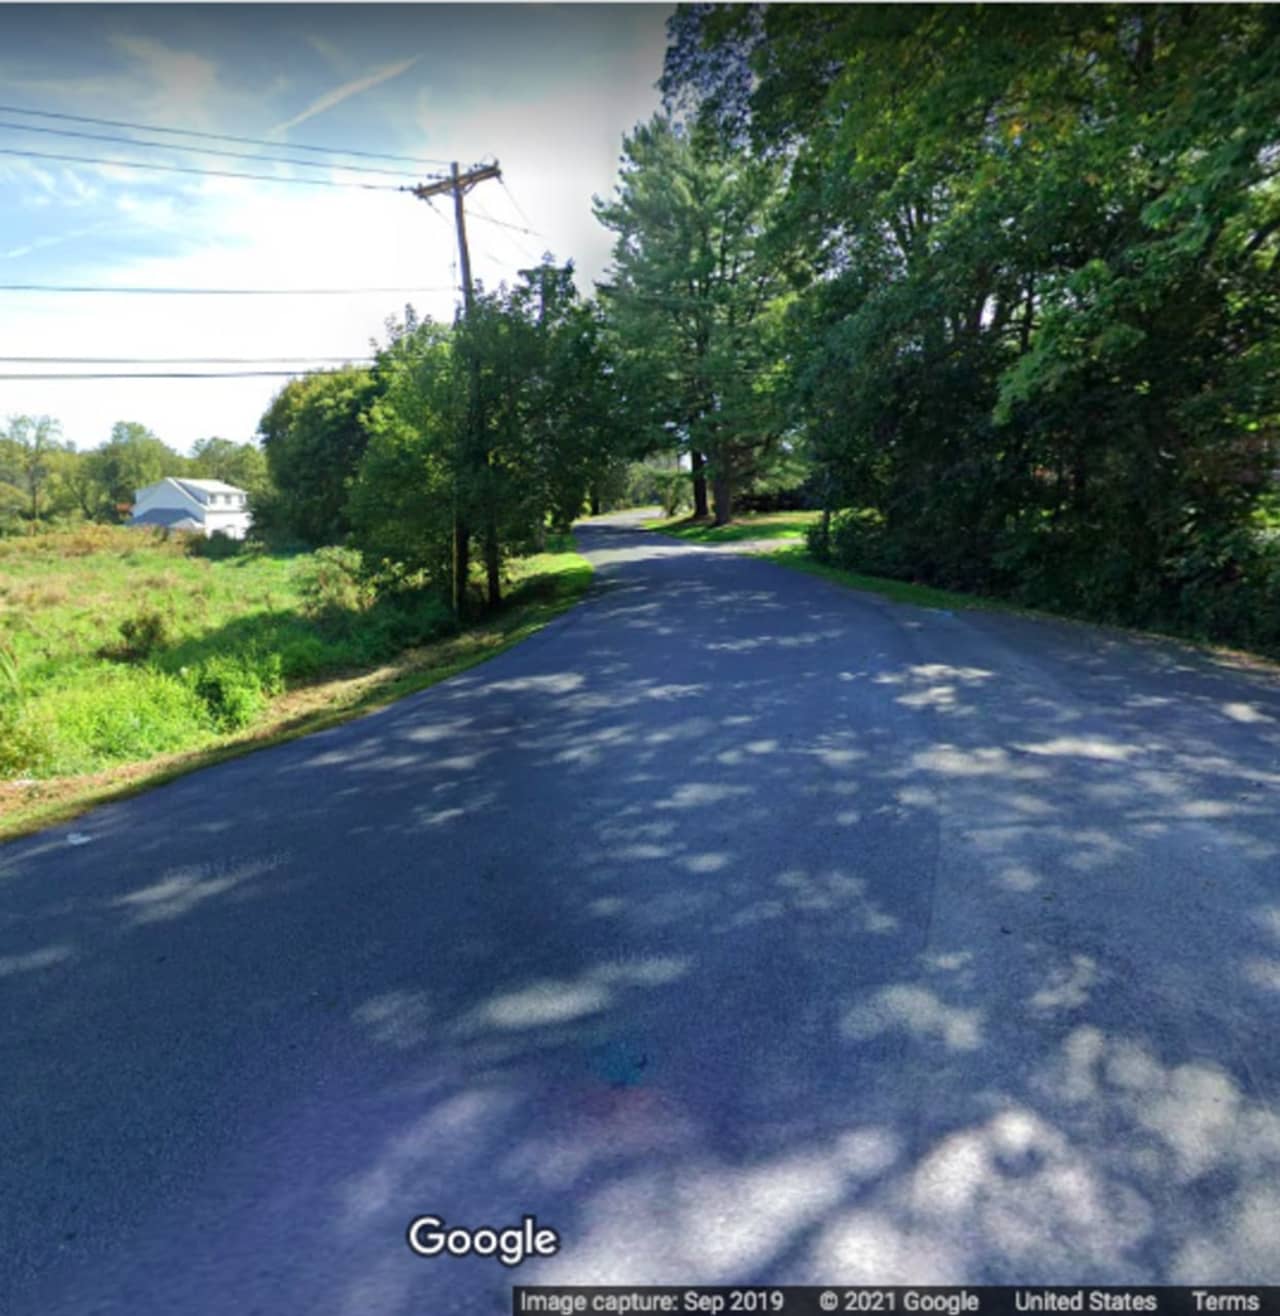 The area near where the first shooting occurred, on Newport Bridge Road in Pine Island.